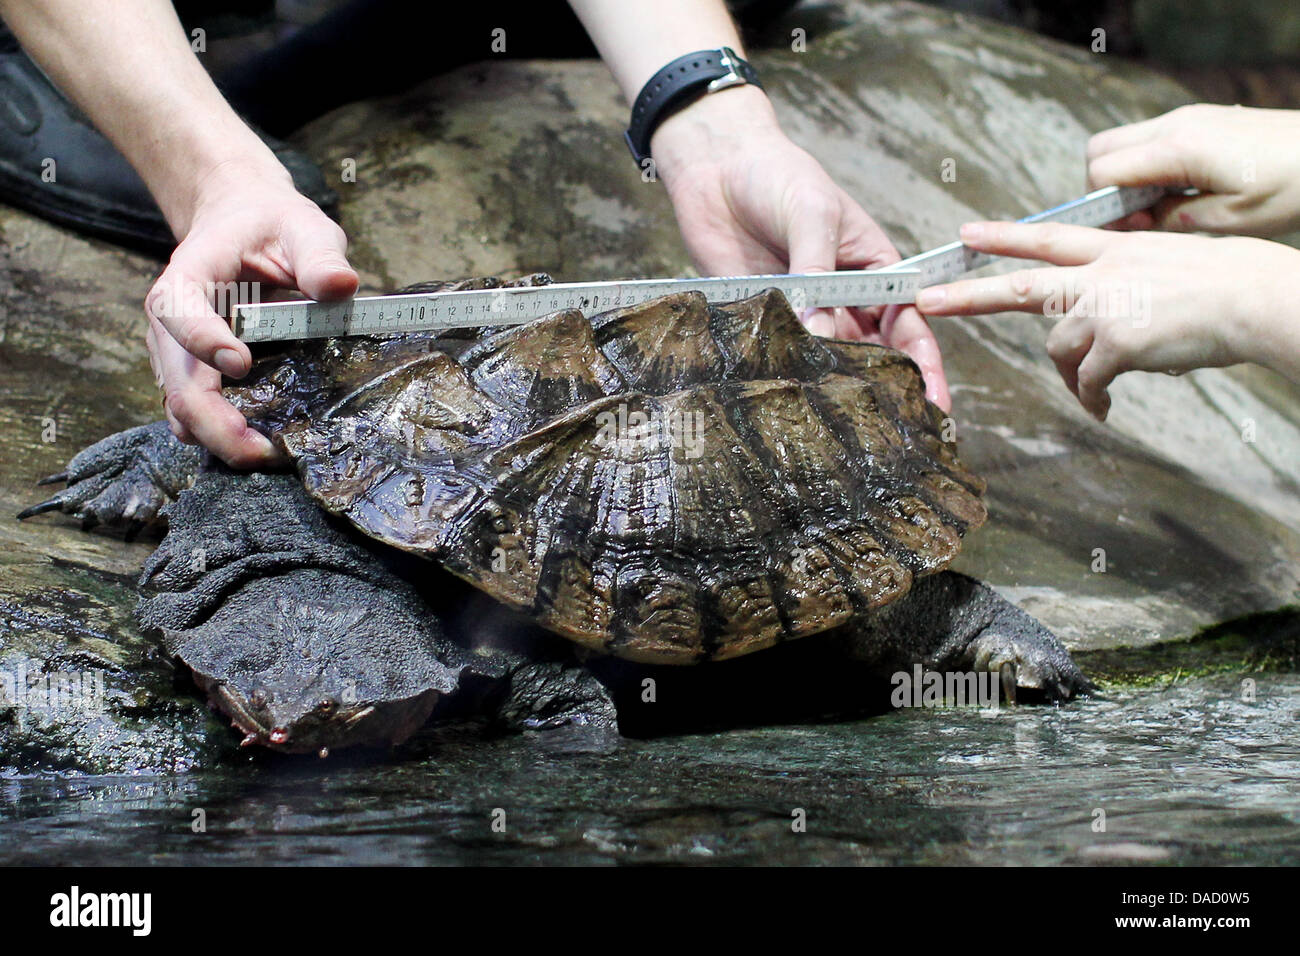 A mata mata (Chelus fimbriatus) freshwater turtle called Rafaello is measured at the Tropical Aquarium of the Hagenbeck zoo in Hamburg, Germany, 29 December 2011. Animals at the Tropical Aquarium are measured, weighed and counted during the annual inventory at the zoo. Photo: Malte Christians Stock Photo